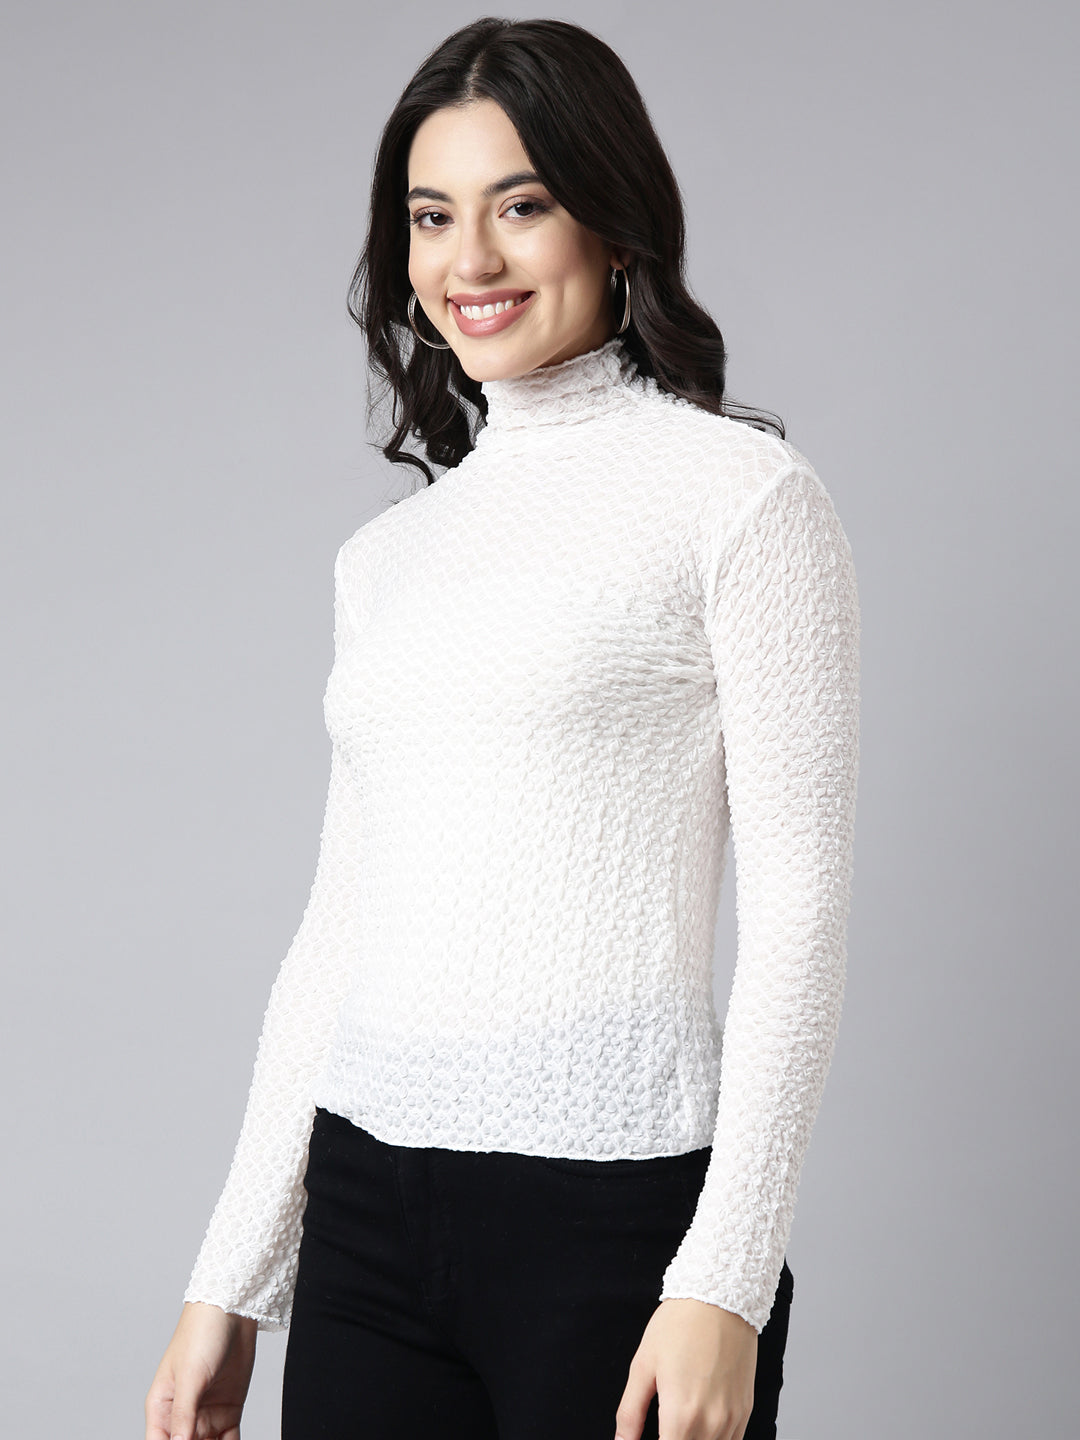 Women Solid White Top